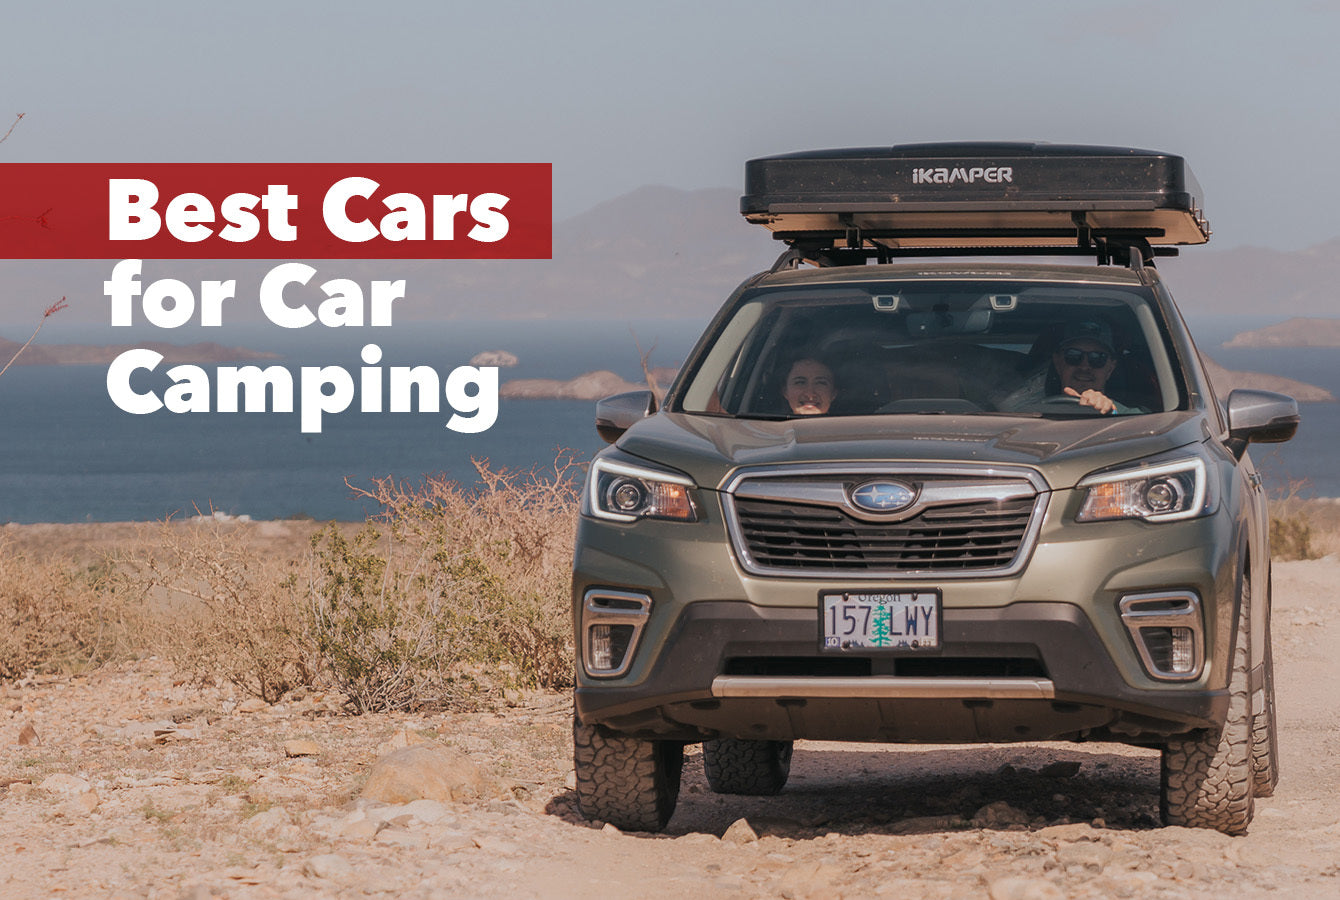 Best Cars for Camping  The Ultimate Guide for Camping Vehicles – iKamper